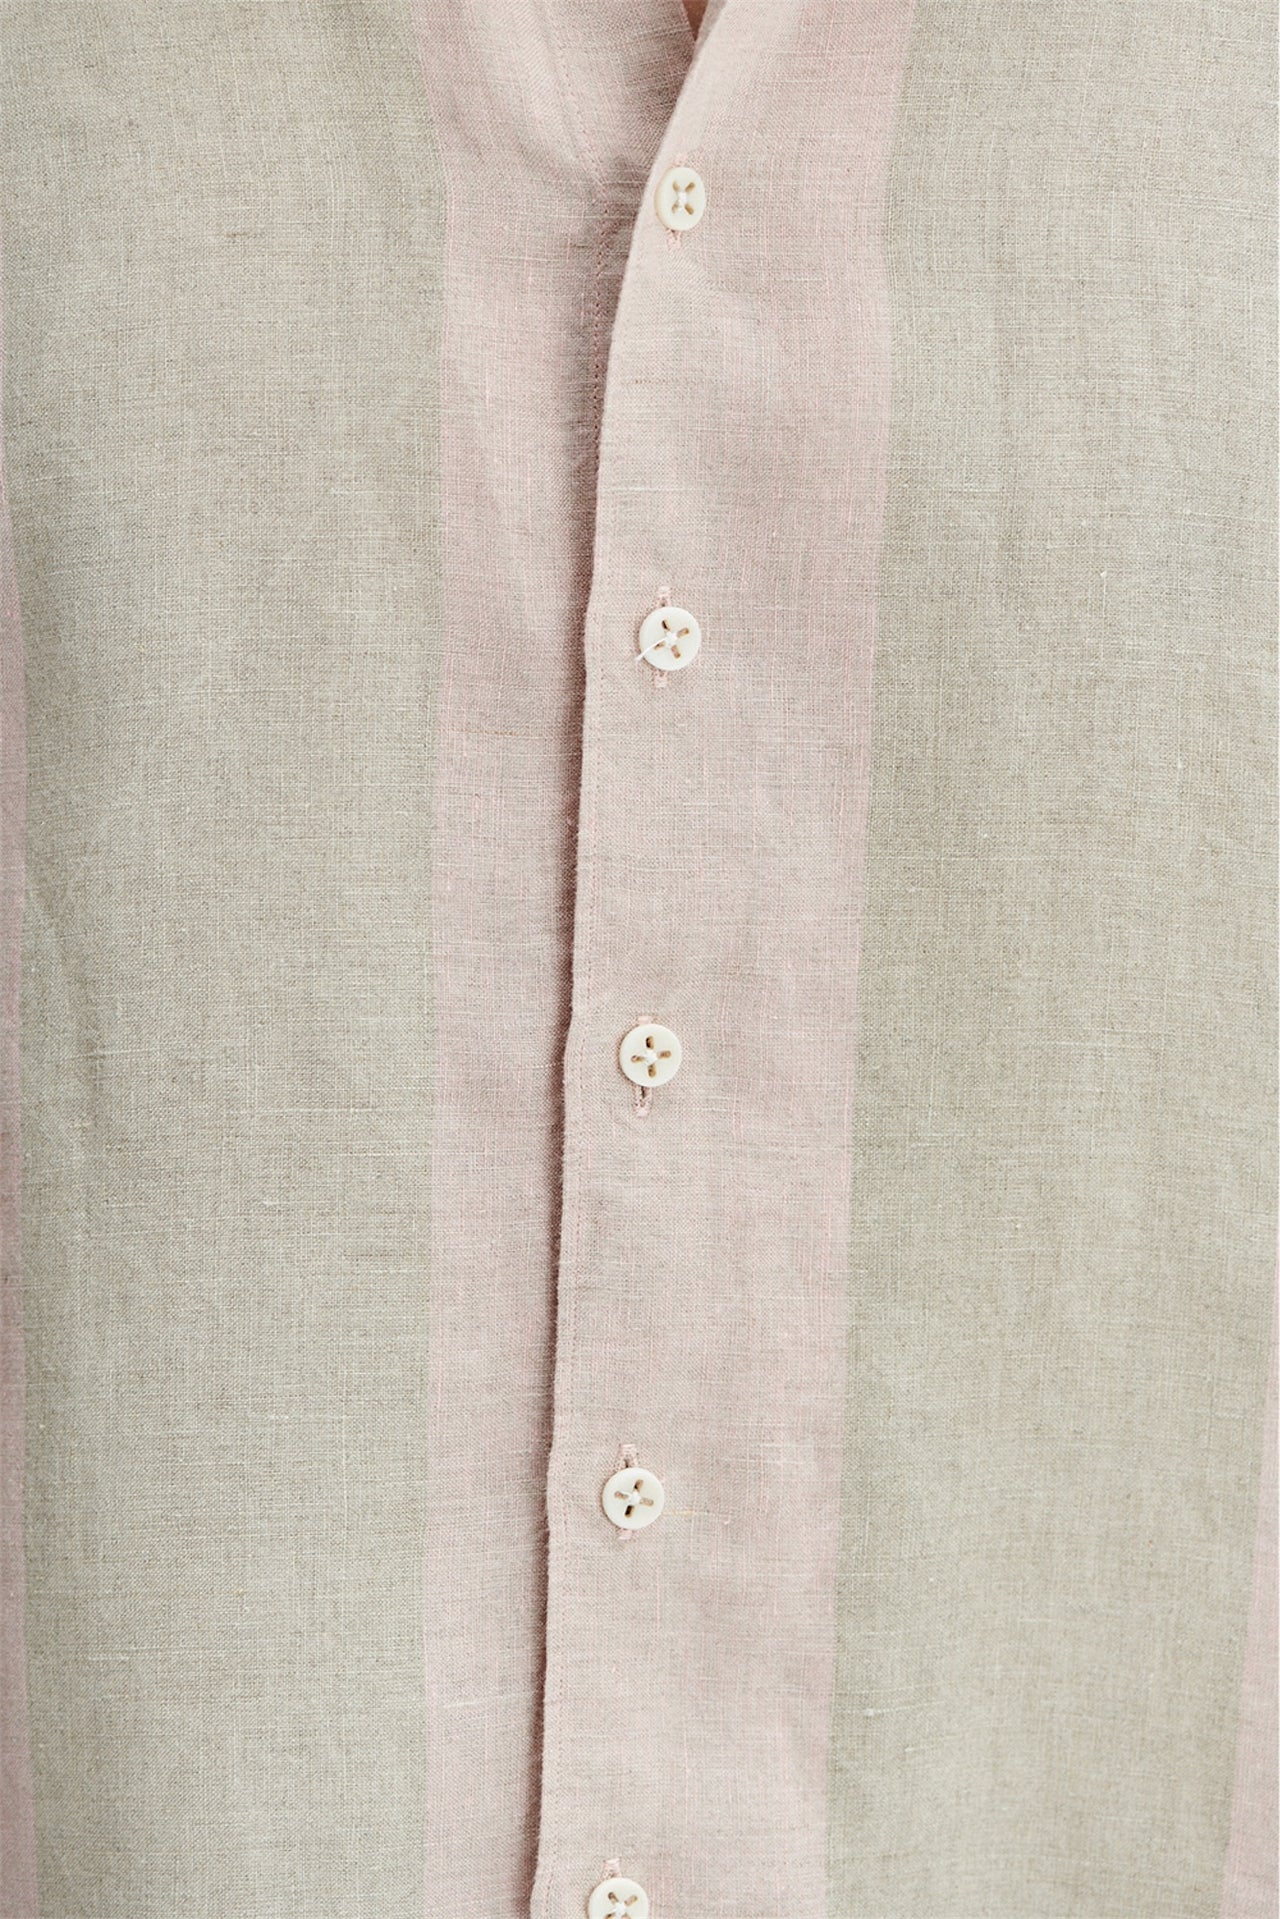 Long Sleeve Oversized Boxy Collar Shirt in Tonal Pink and Beige Stripes of a Italian Traceable Linen